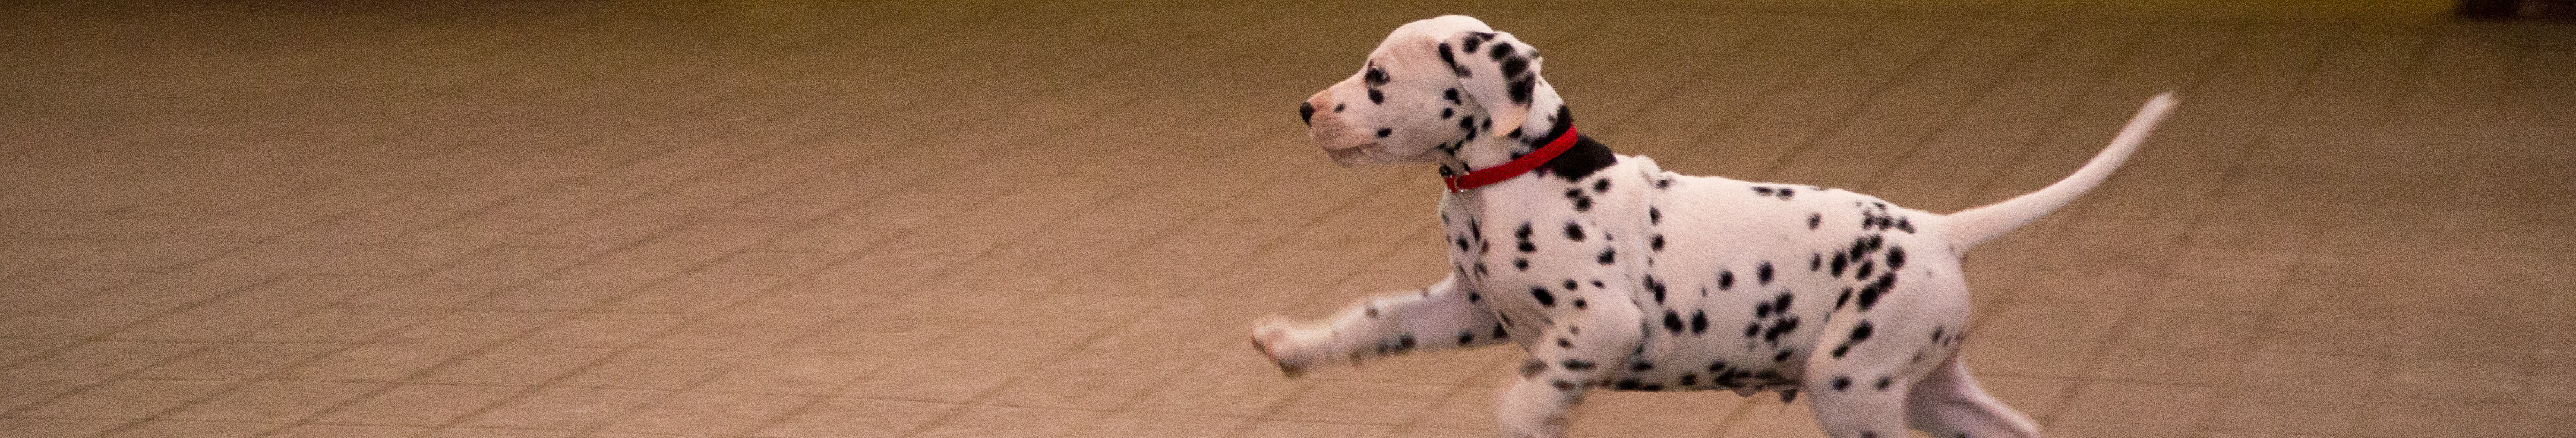 Meet Barley, Our Newest and Cutest Dalmatian Bud